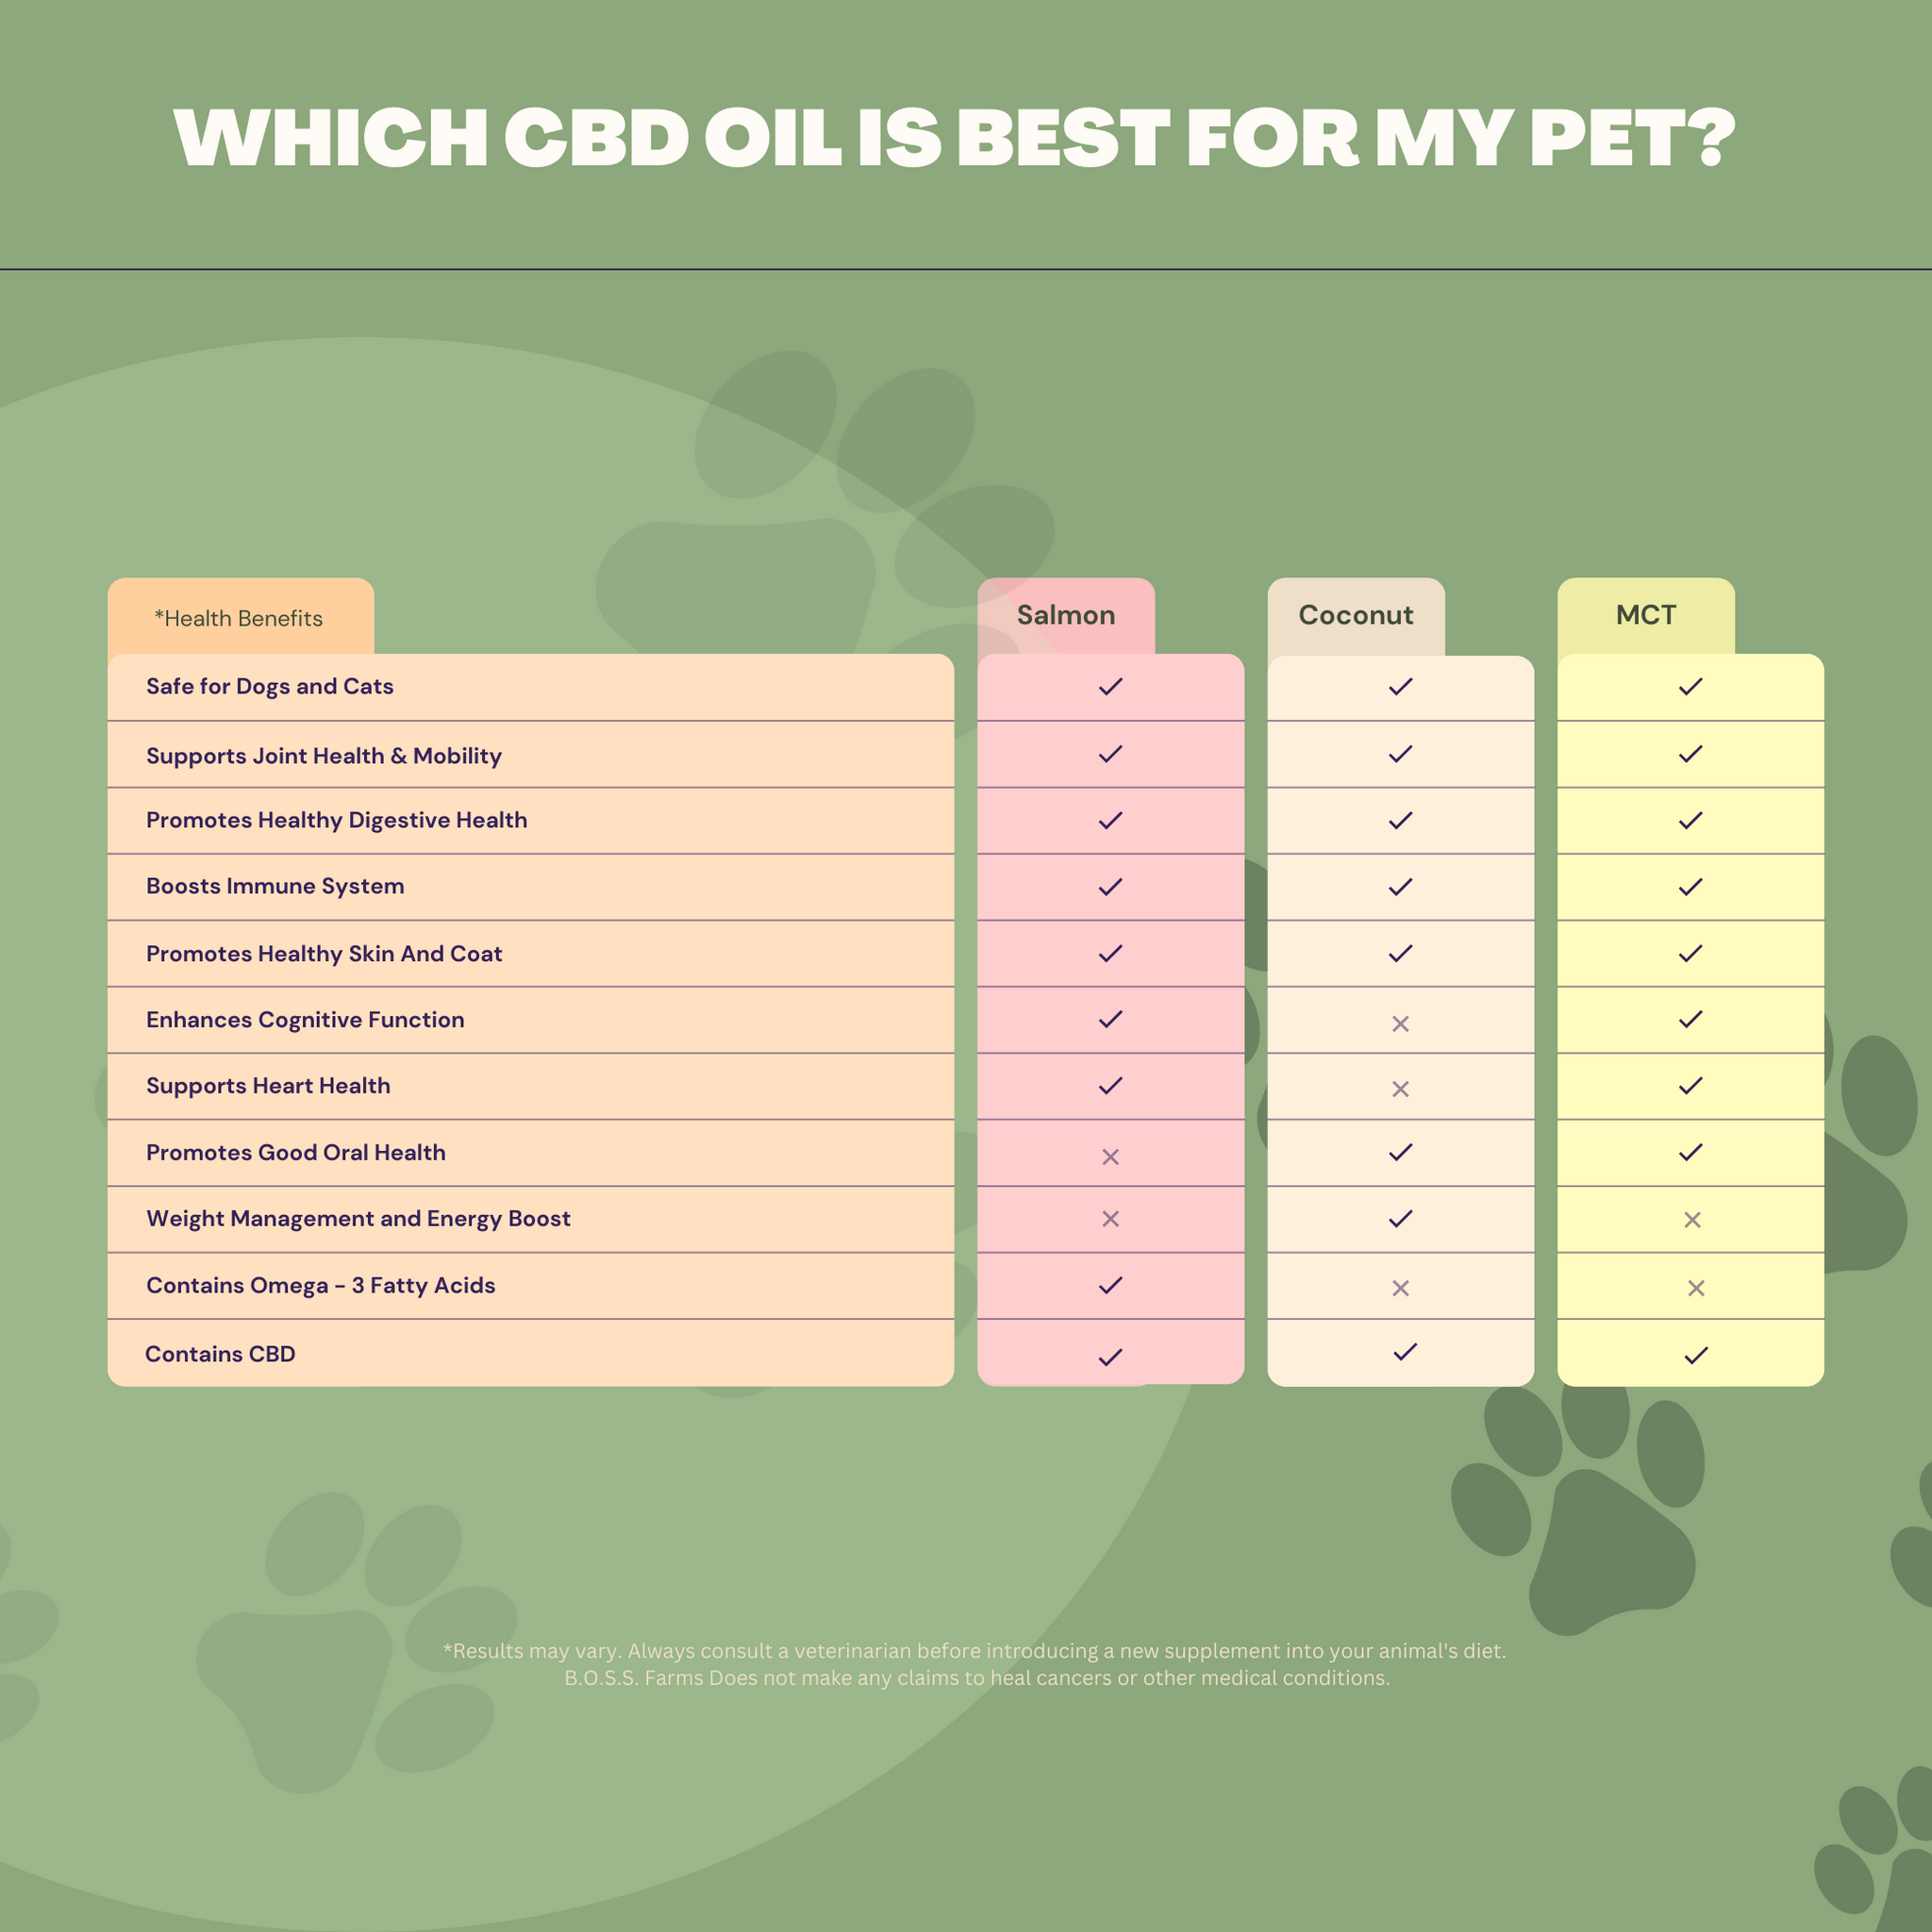 Large Organic Coconut CBD Oil : Hip & Joints Health / Skin & Coat : 4 oz - 1,400 mg CBD for dogs and cats